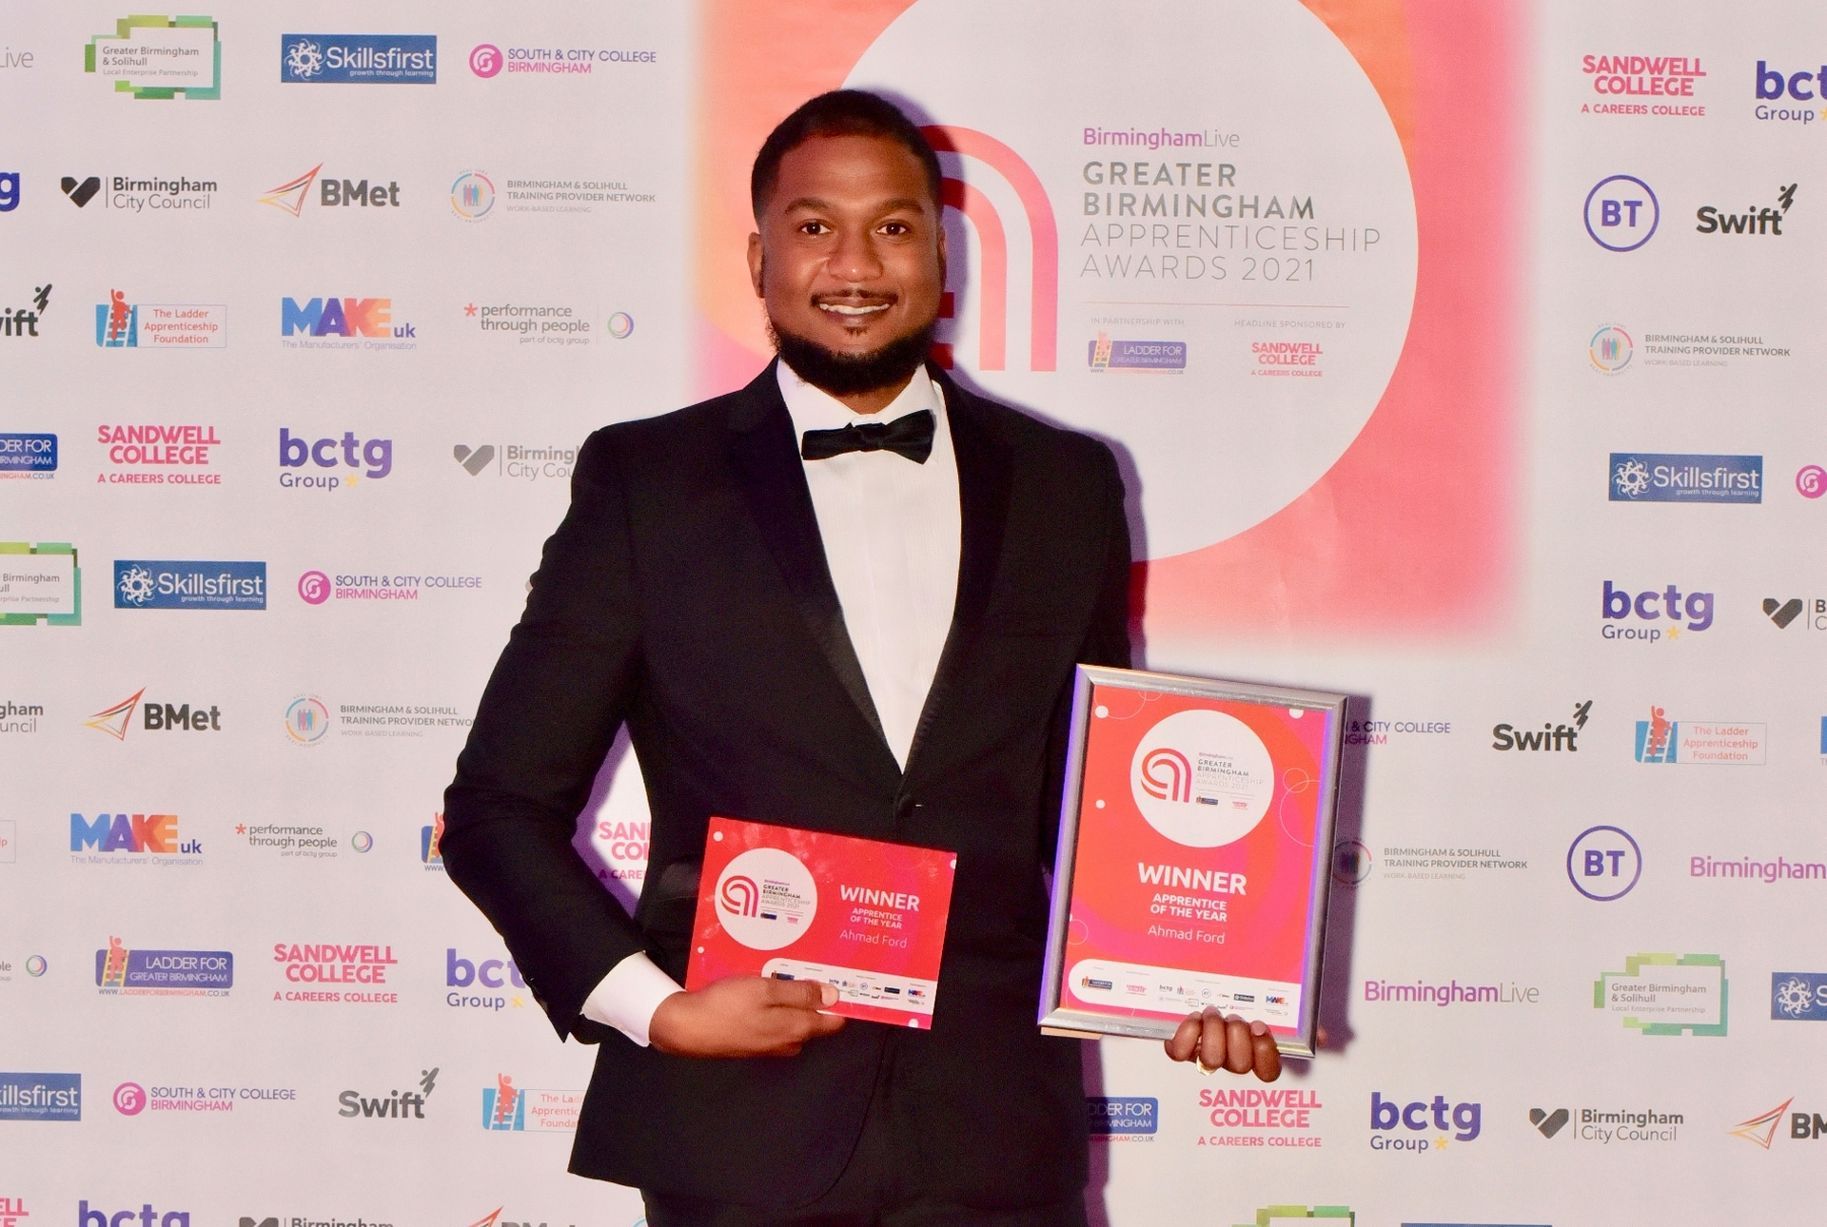 Ahmad is the engineering apprentice of the year